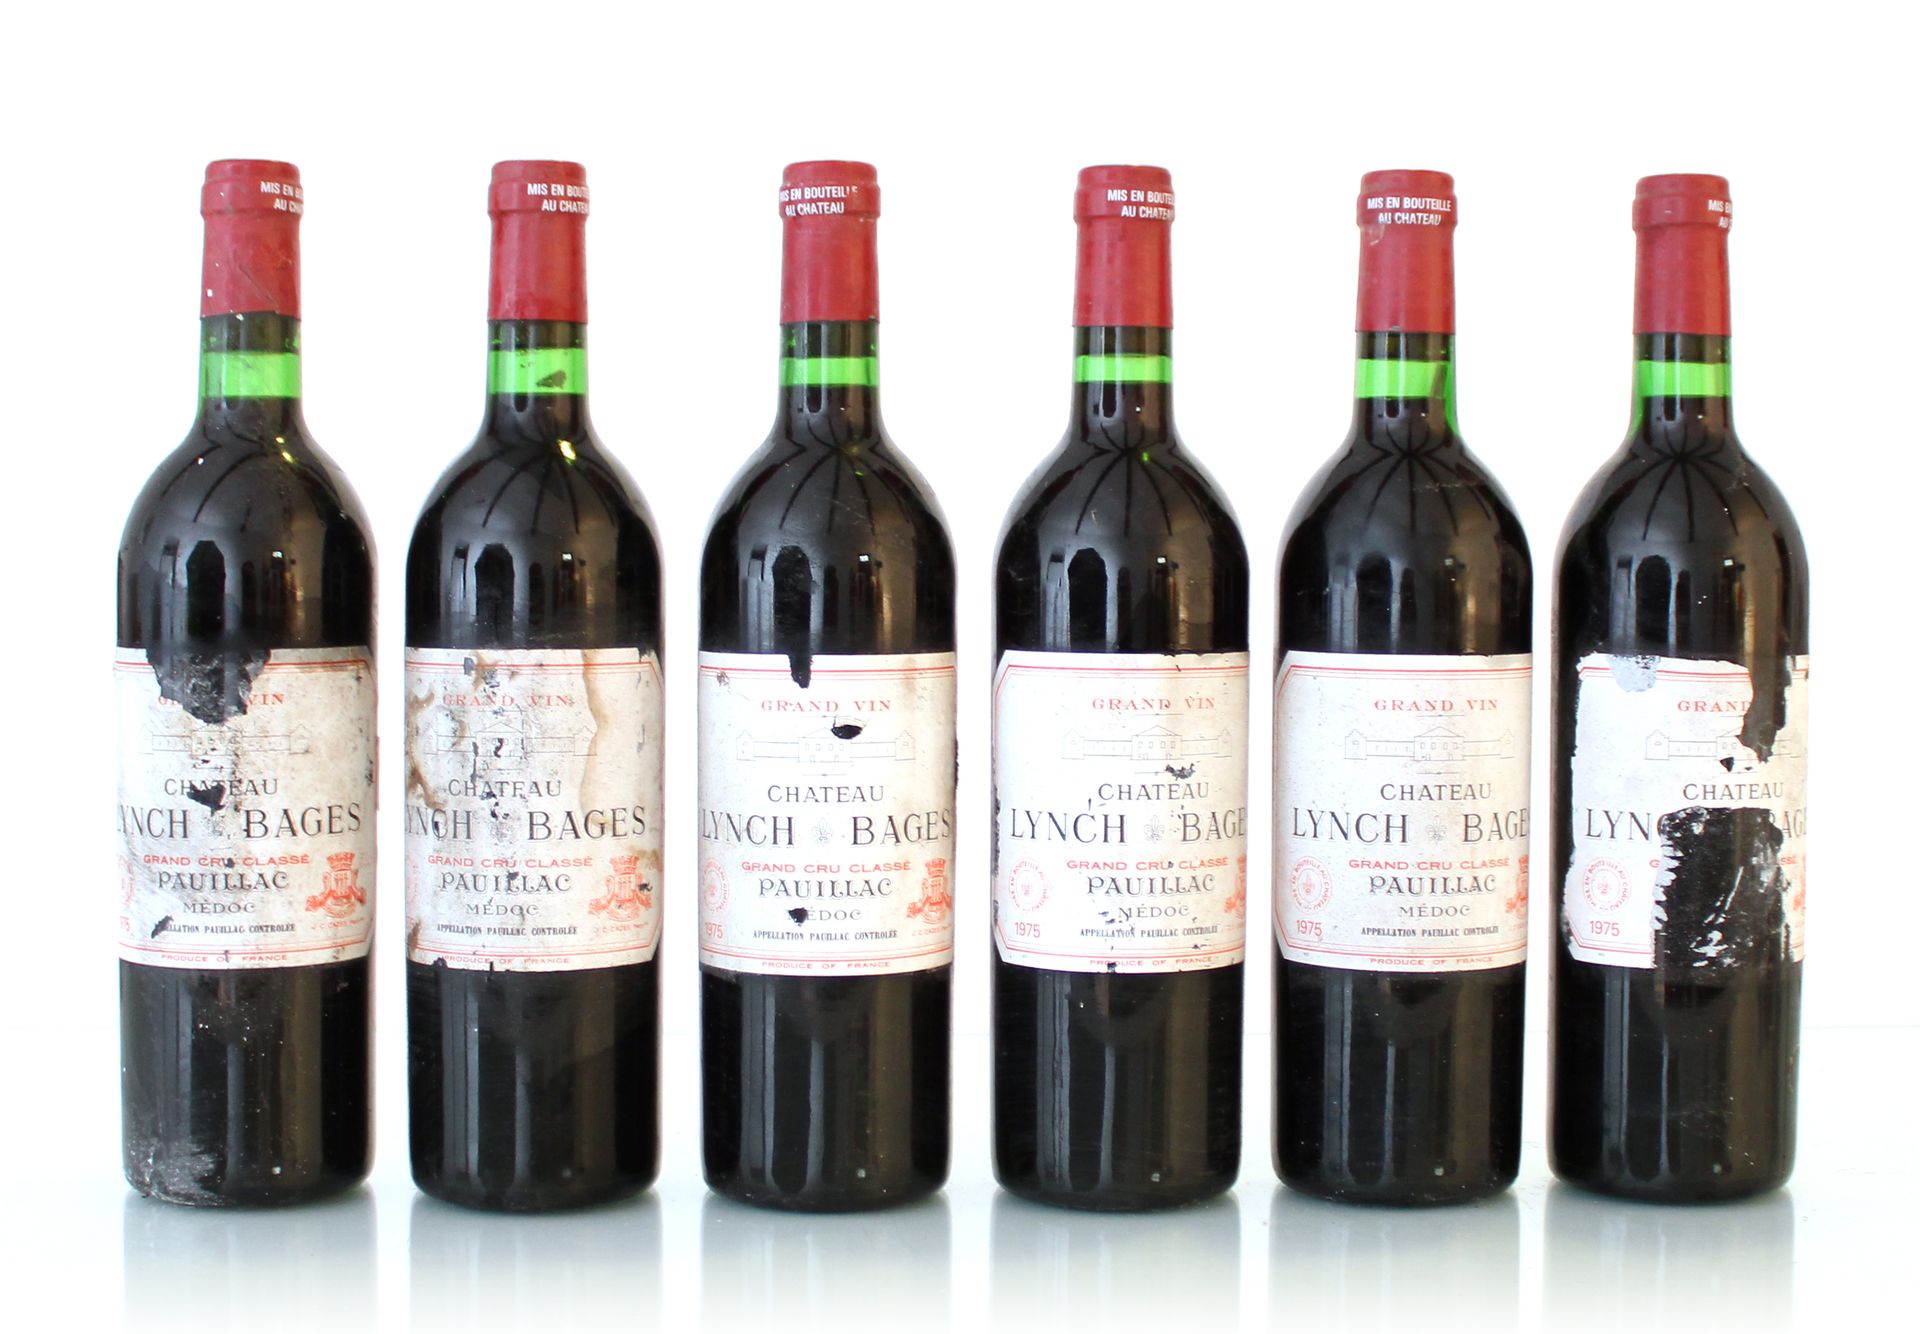 Null 6瓶CHÂTEAU LYNCH BAGES

年份 : 1975年

产地：GCC5 PAUILLAC

备注：（对B.G；e.F.S和e.T.A；c&hellip;